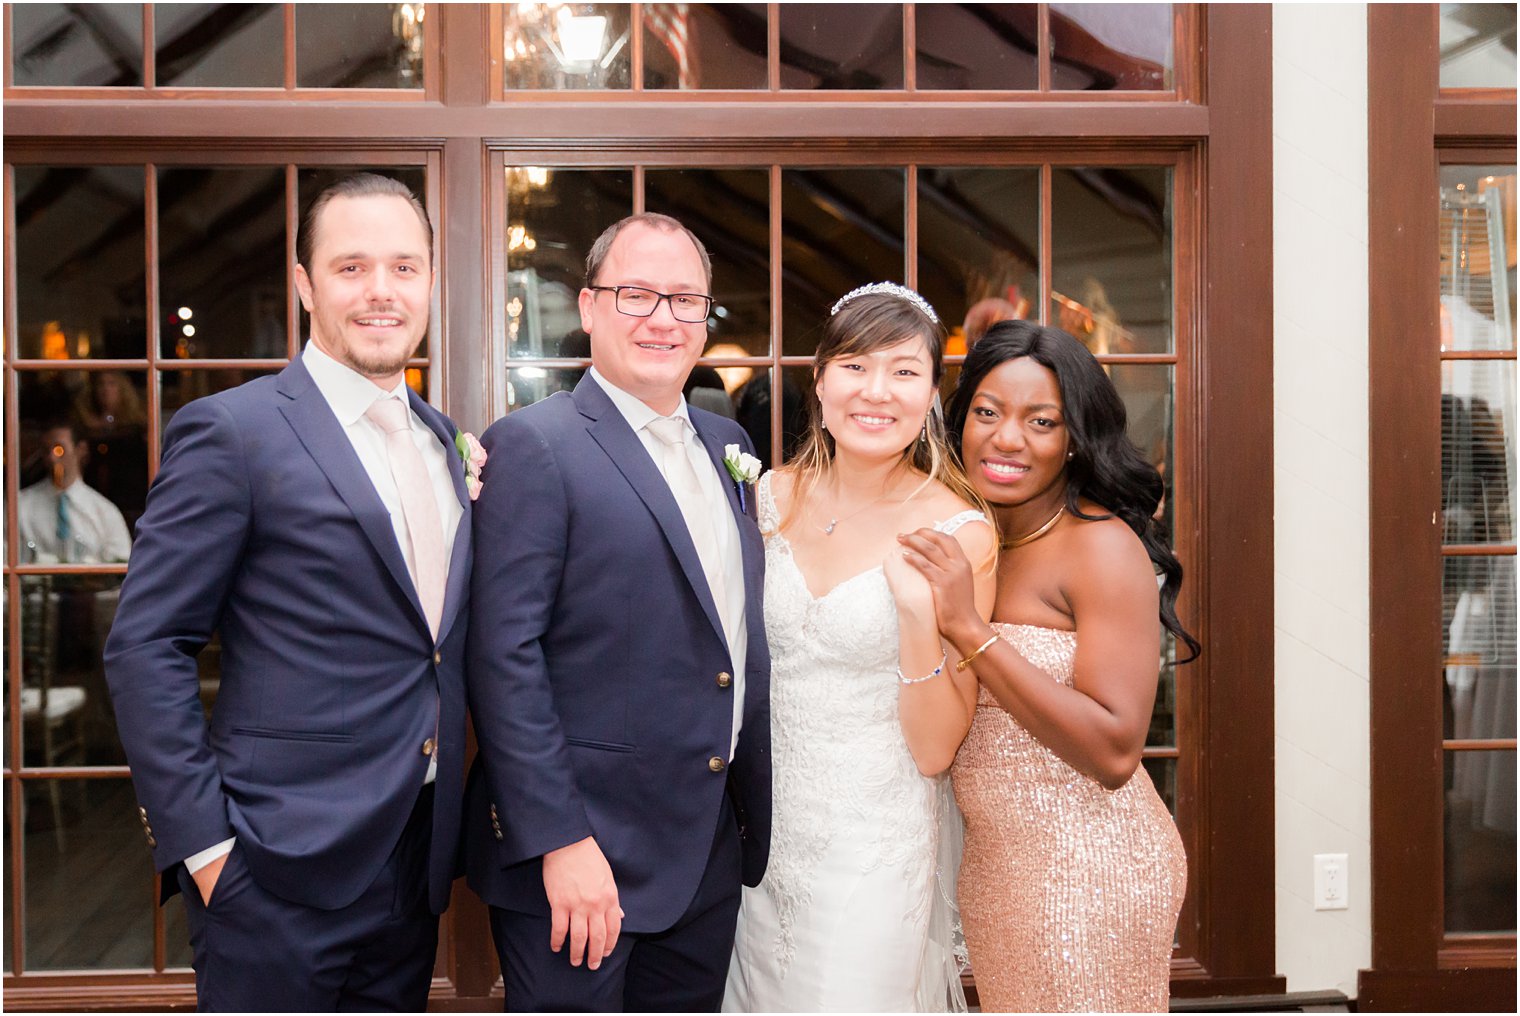 bride and groom with best man and maid of honor for Lake Mohawk Country Club wedding